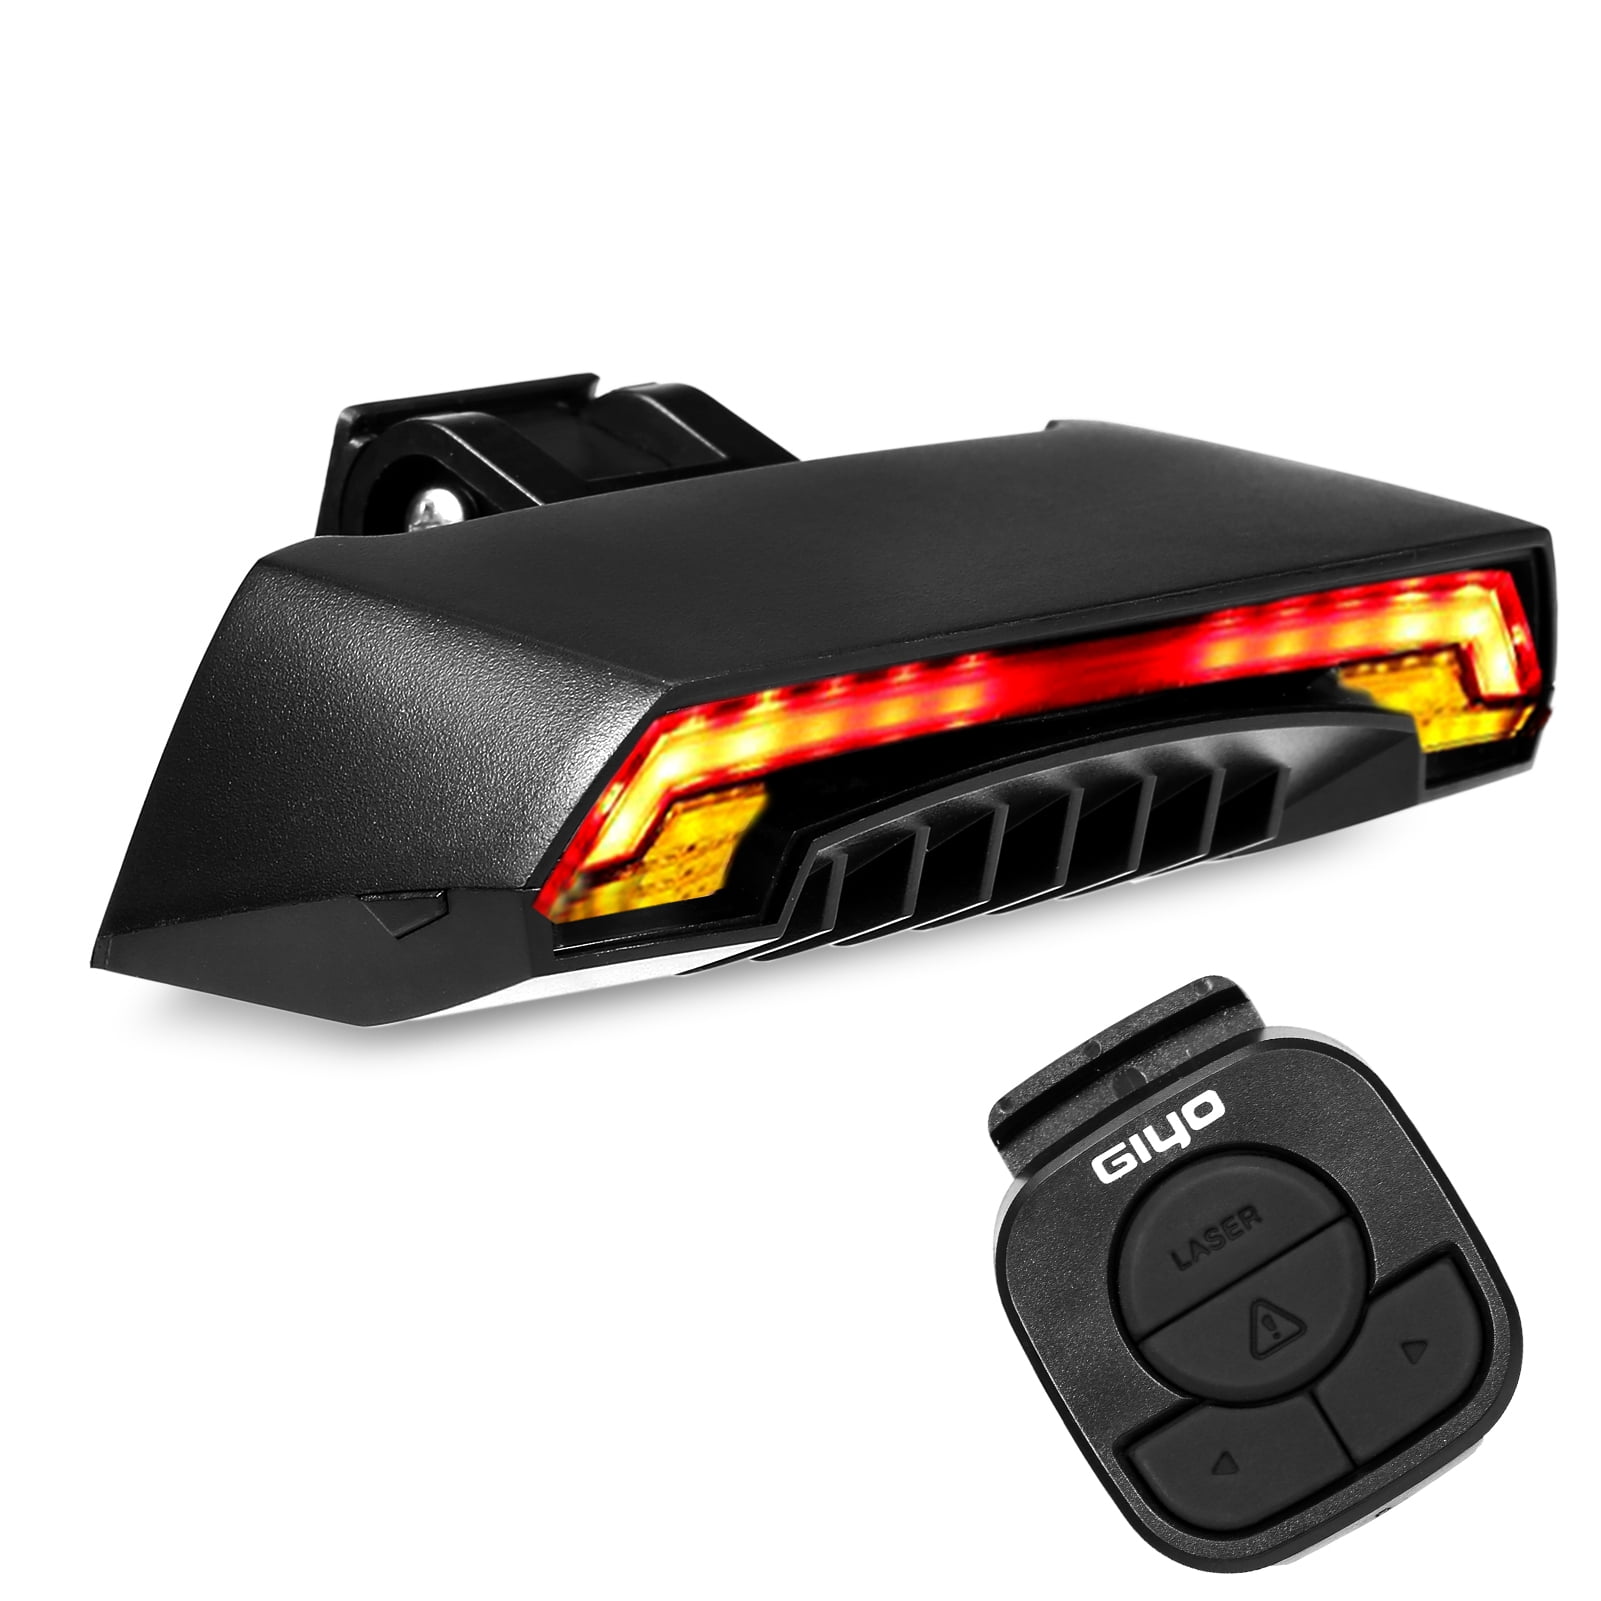 Wireless USB Rechargeable Remote Control Turn Signal Bicycle Tail Light 5